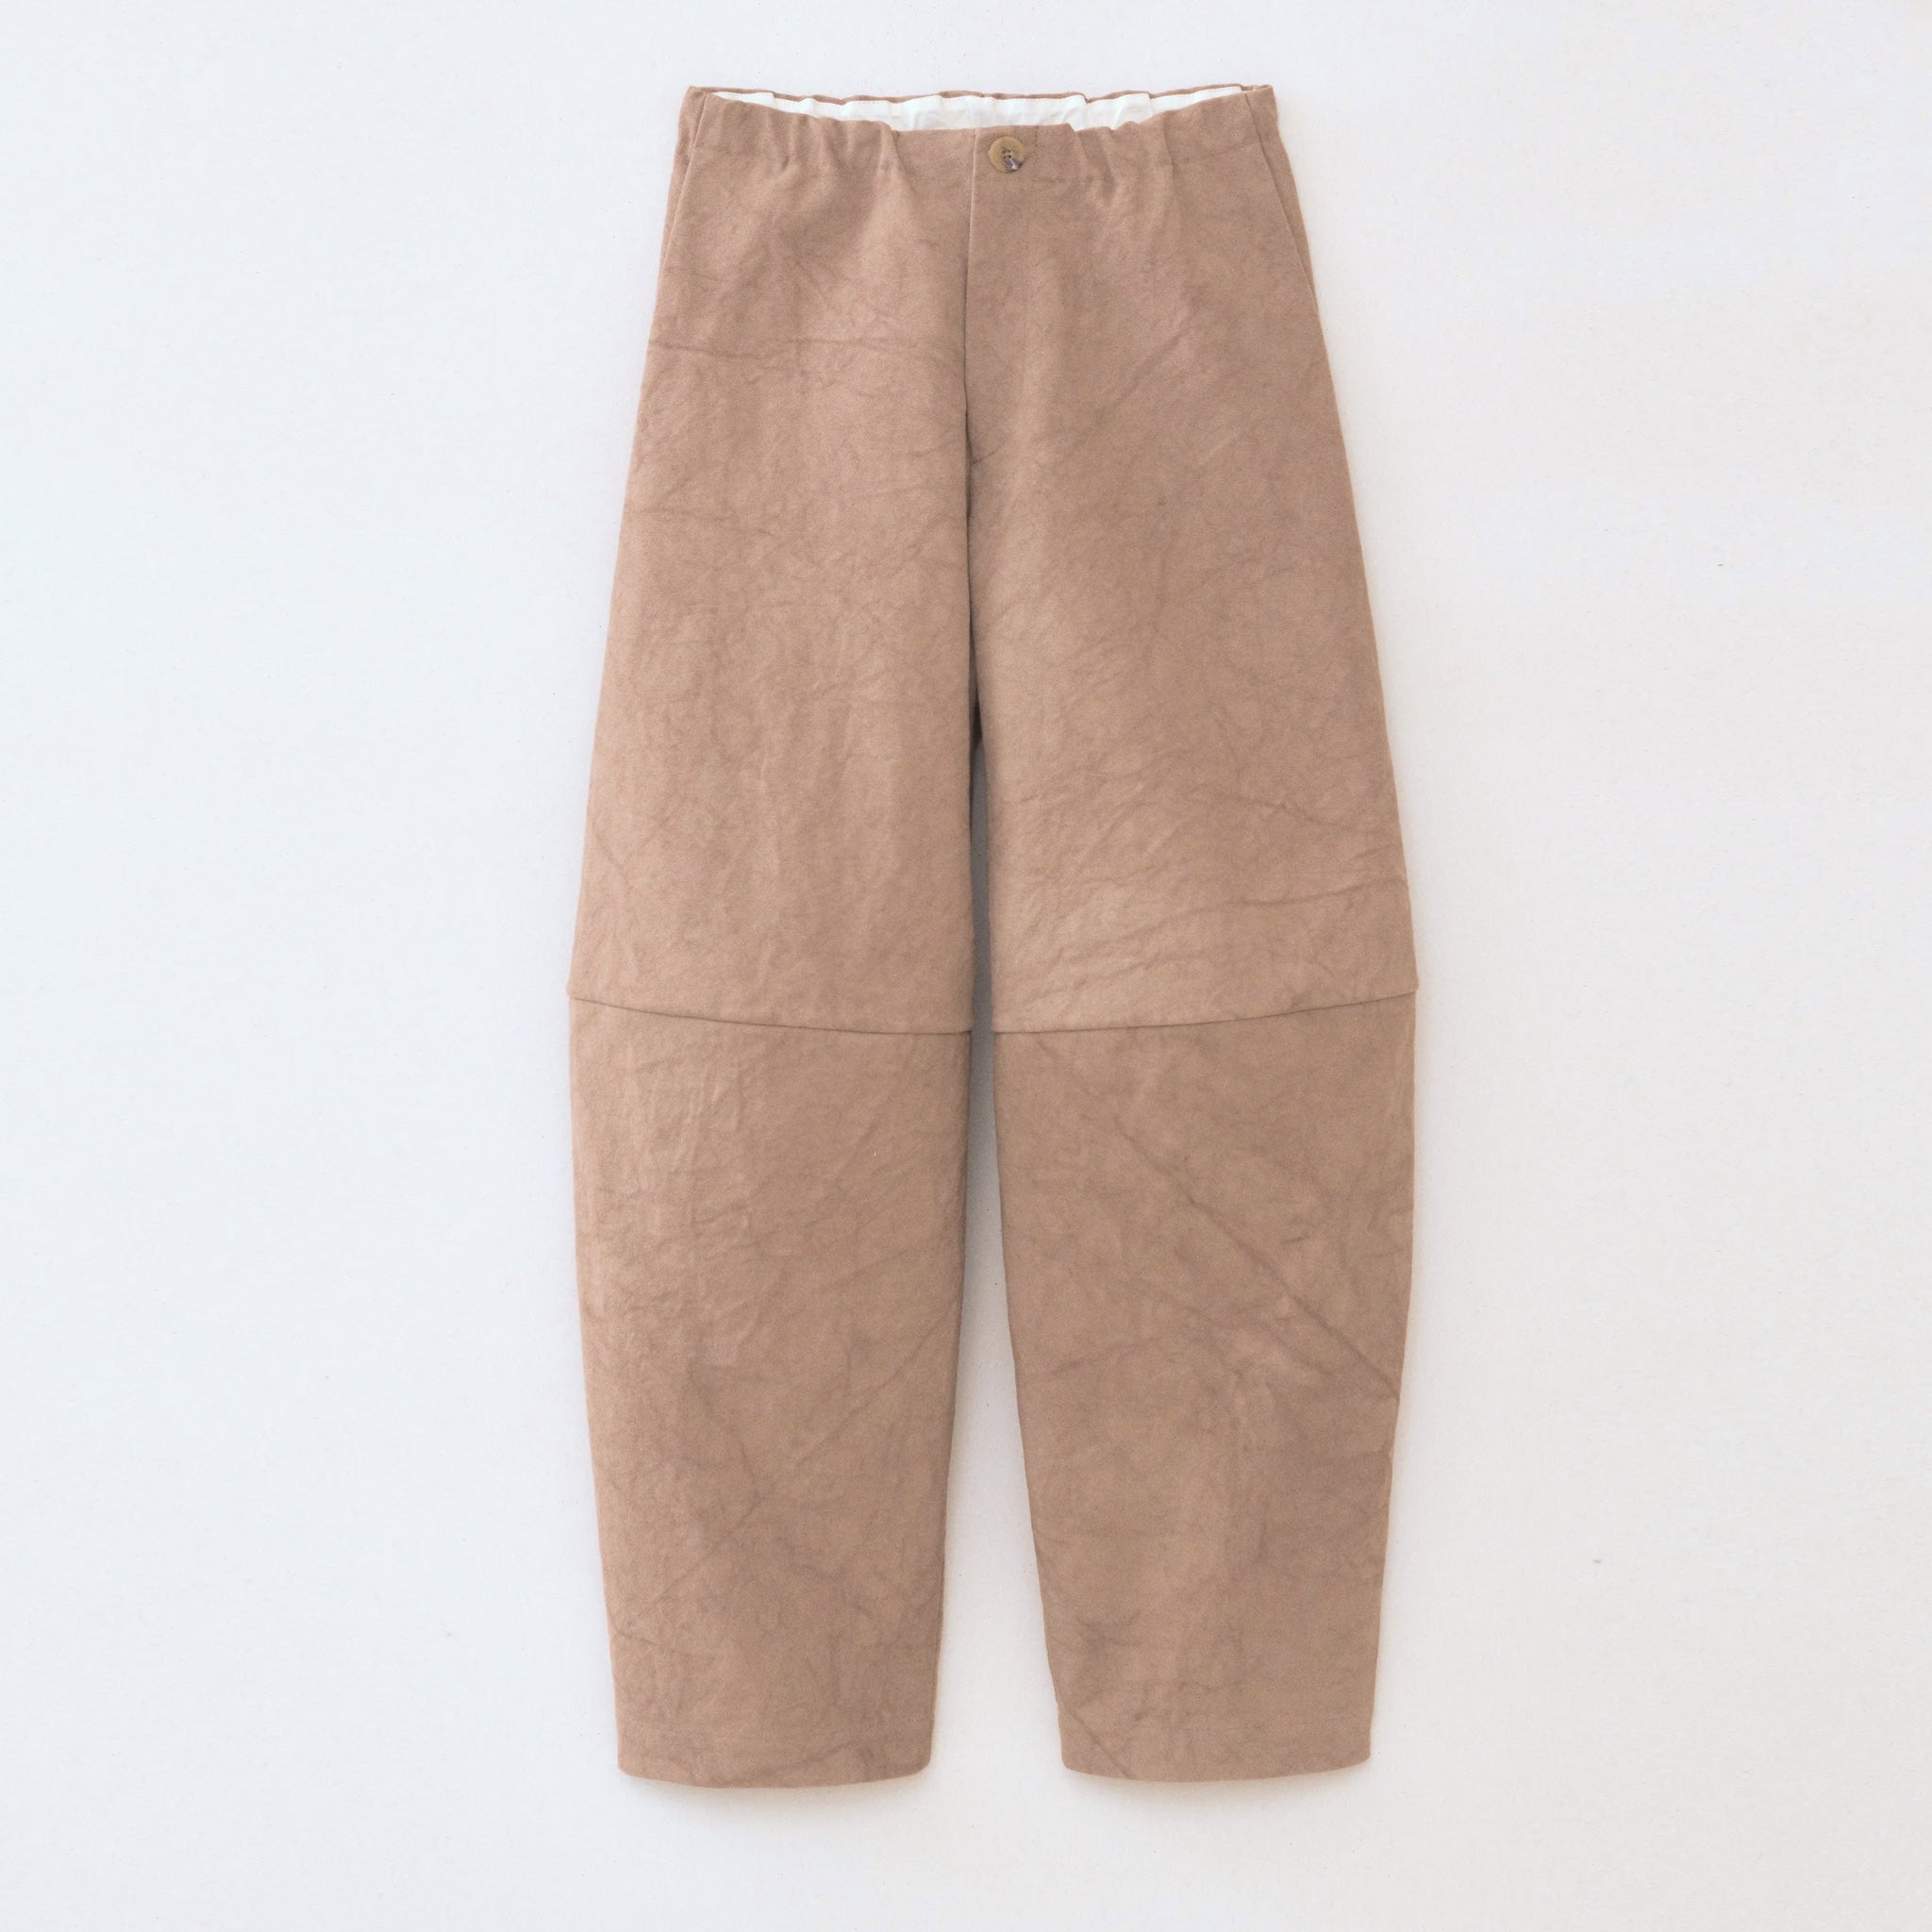 A model wears the Canvas Pants in a light brown color with a slightly rumpled and naturally dyed effect, side pockets, and a partial elastic waistband, flat view.